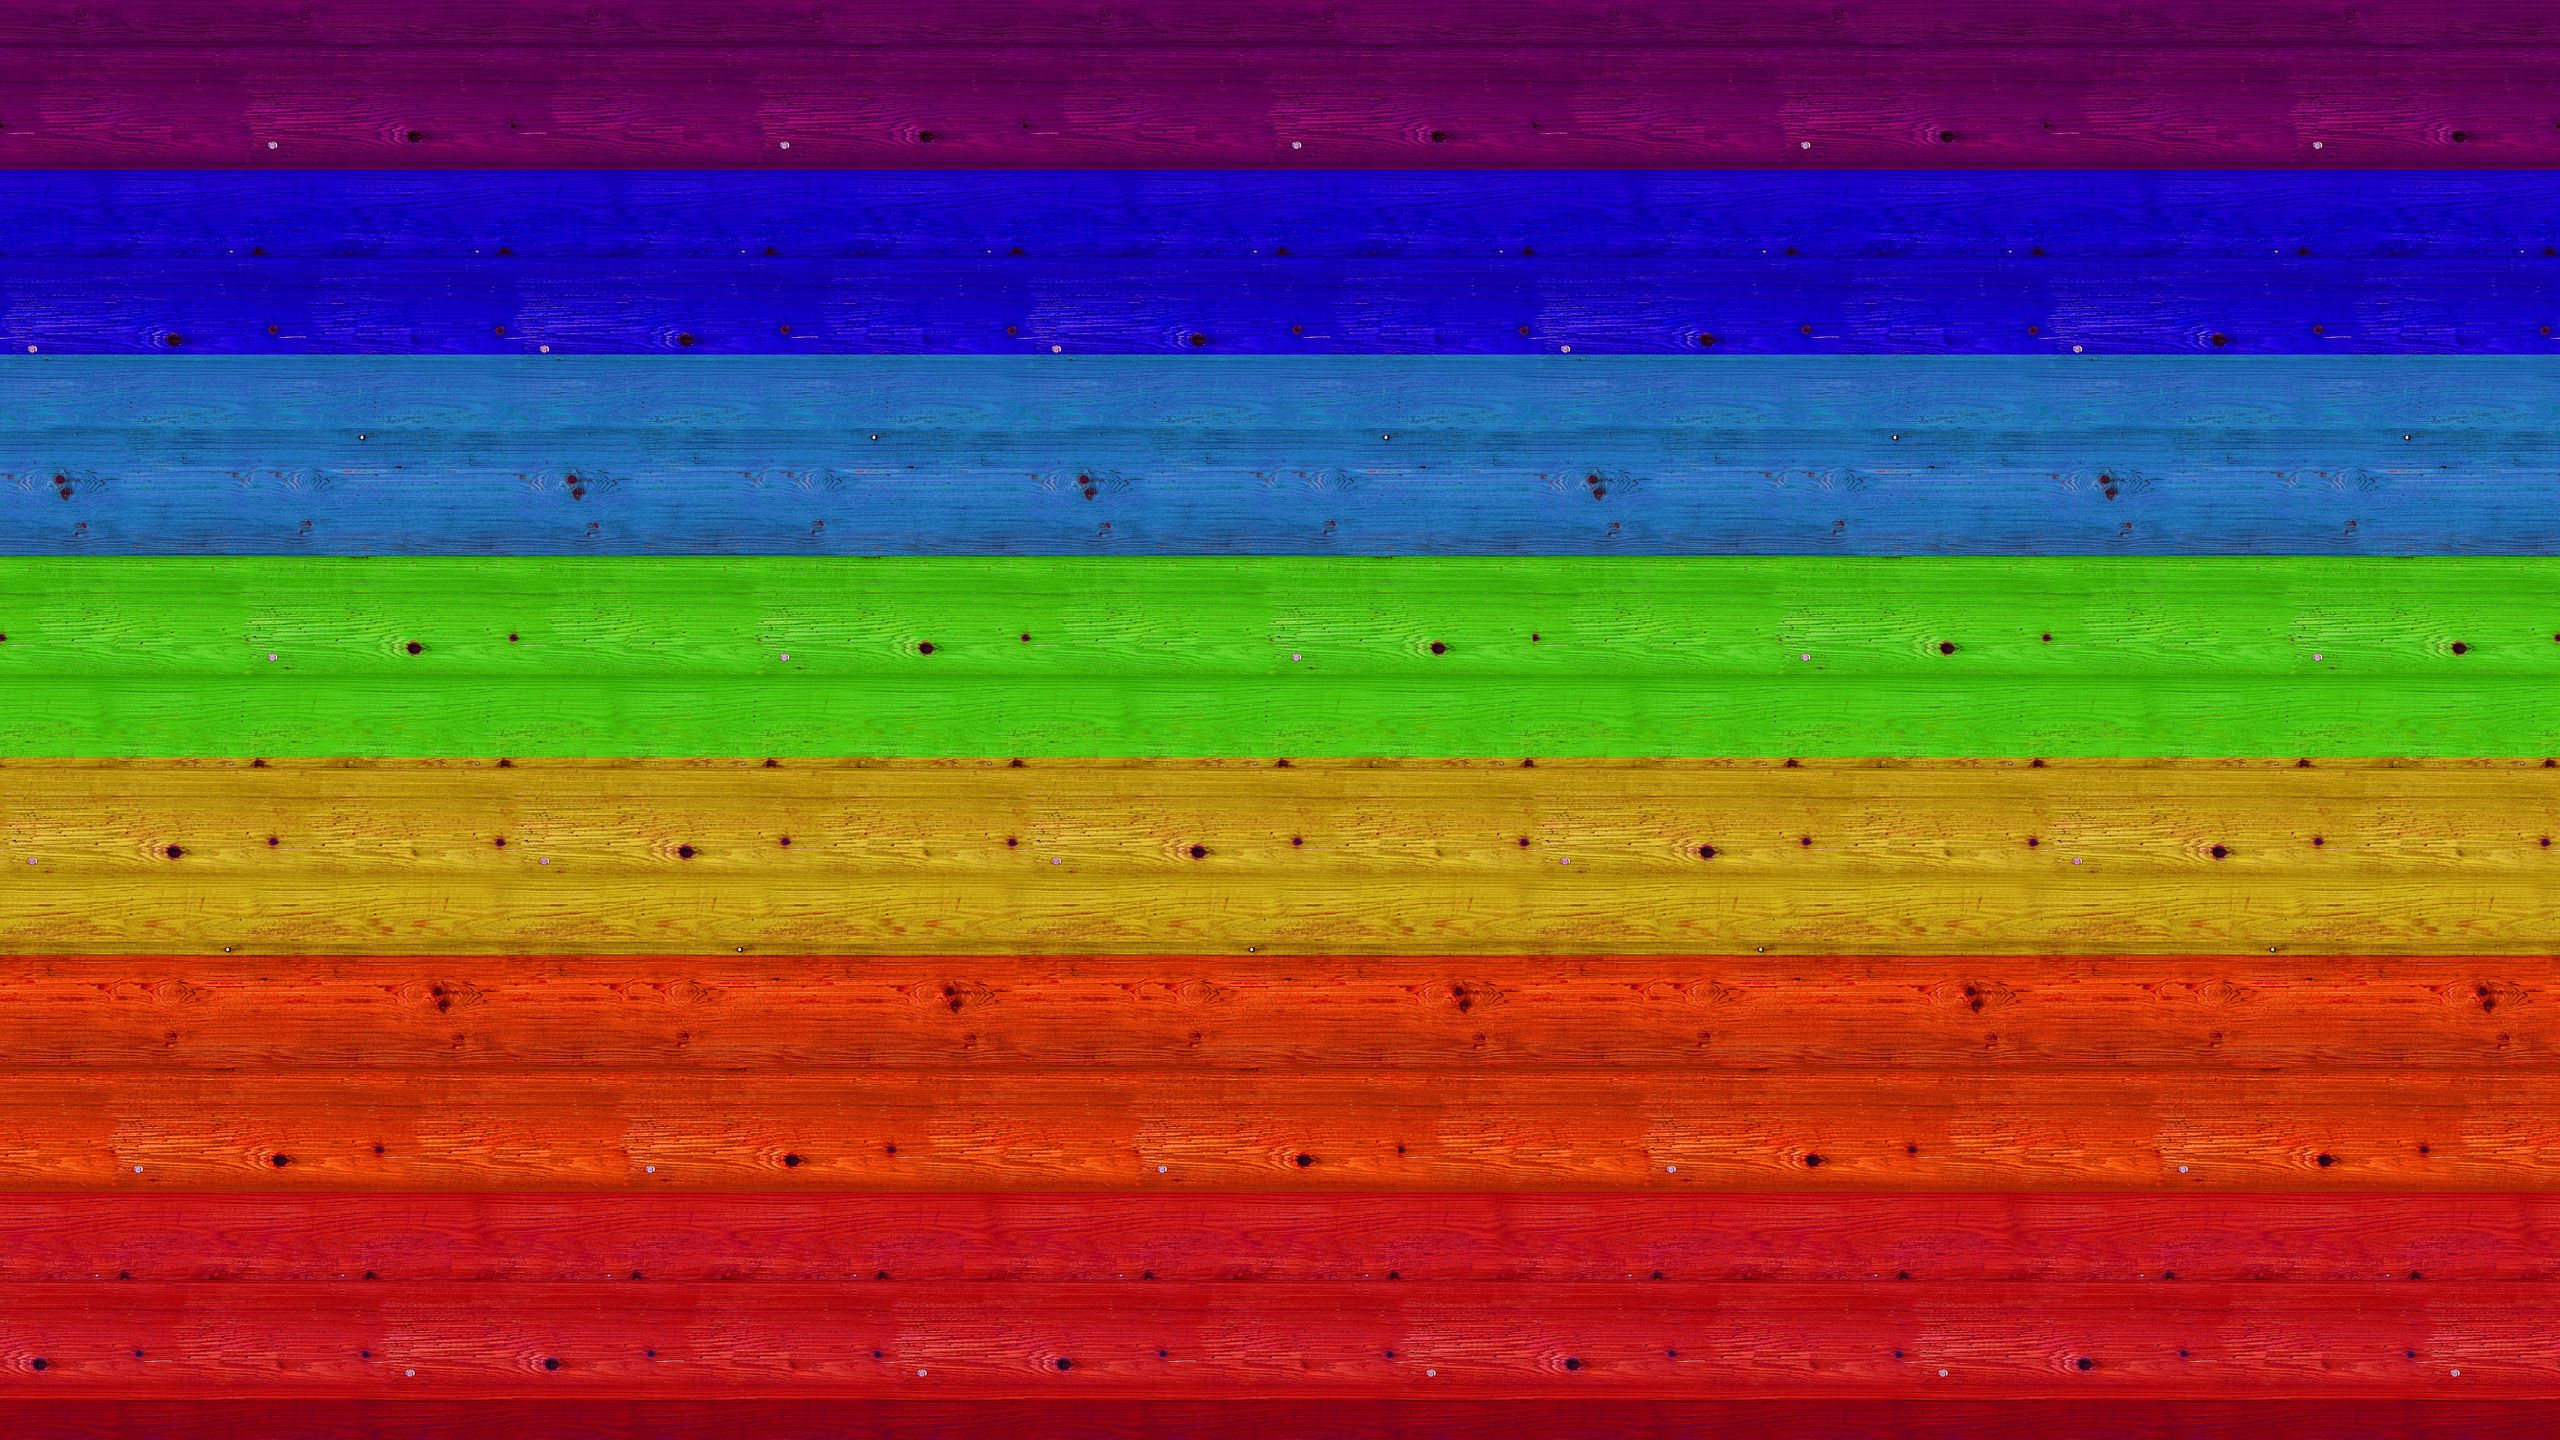 Download wallpaper 2560x1440 multicolored, boards, texture, wall, rainbow  widescreen 16:9 hd background